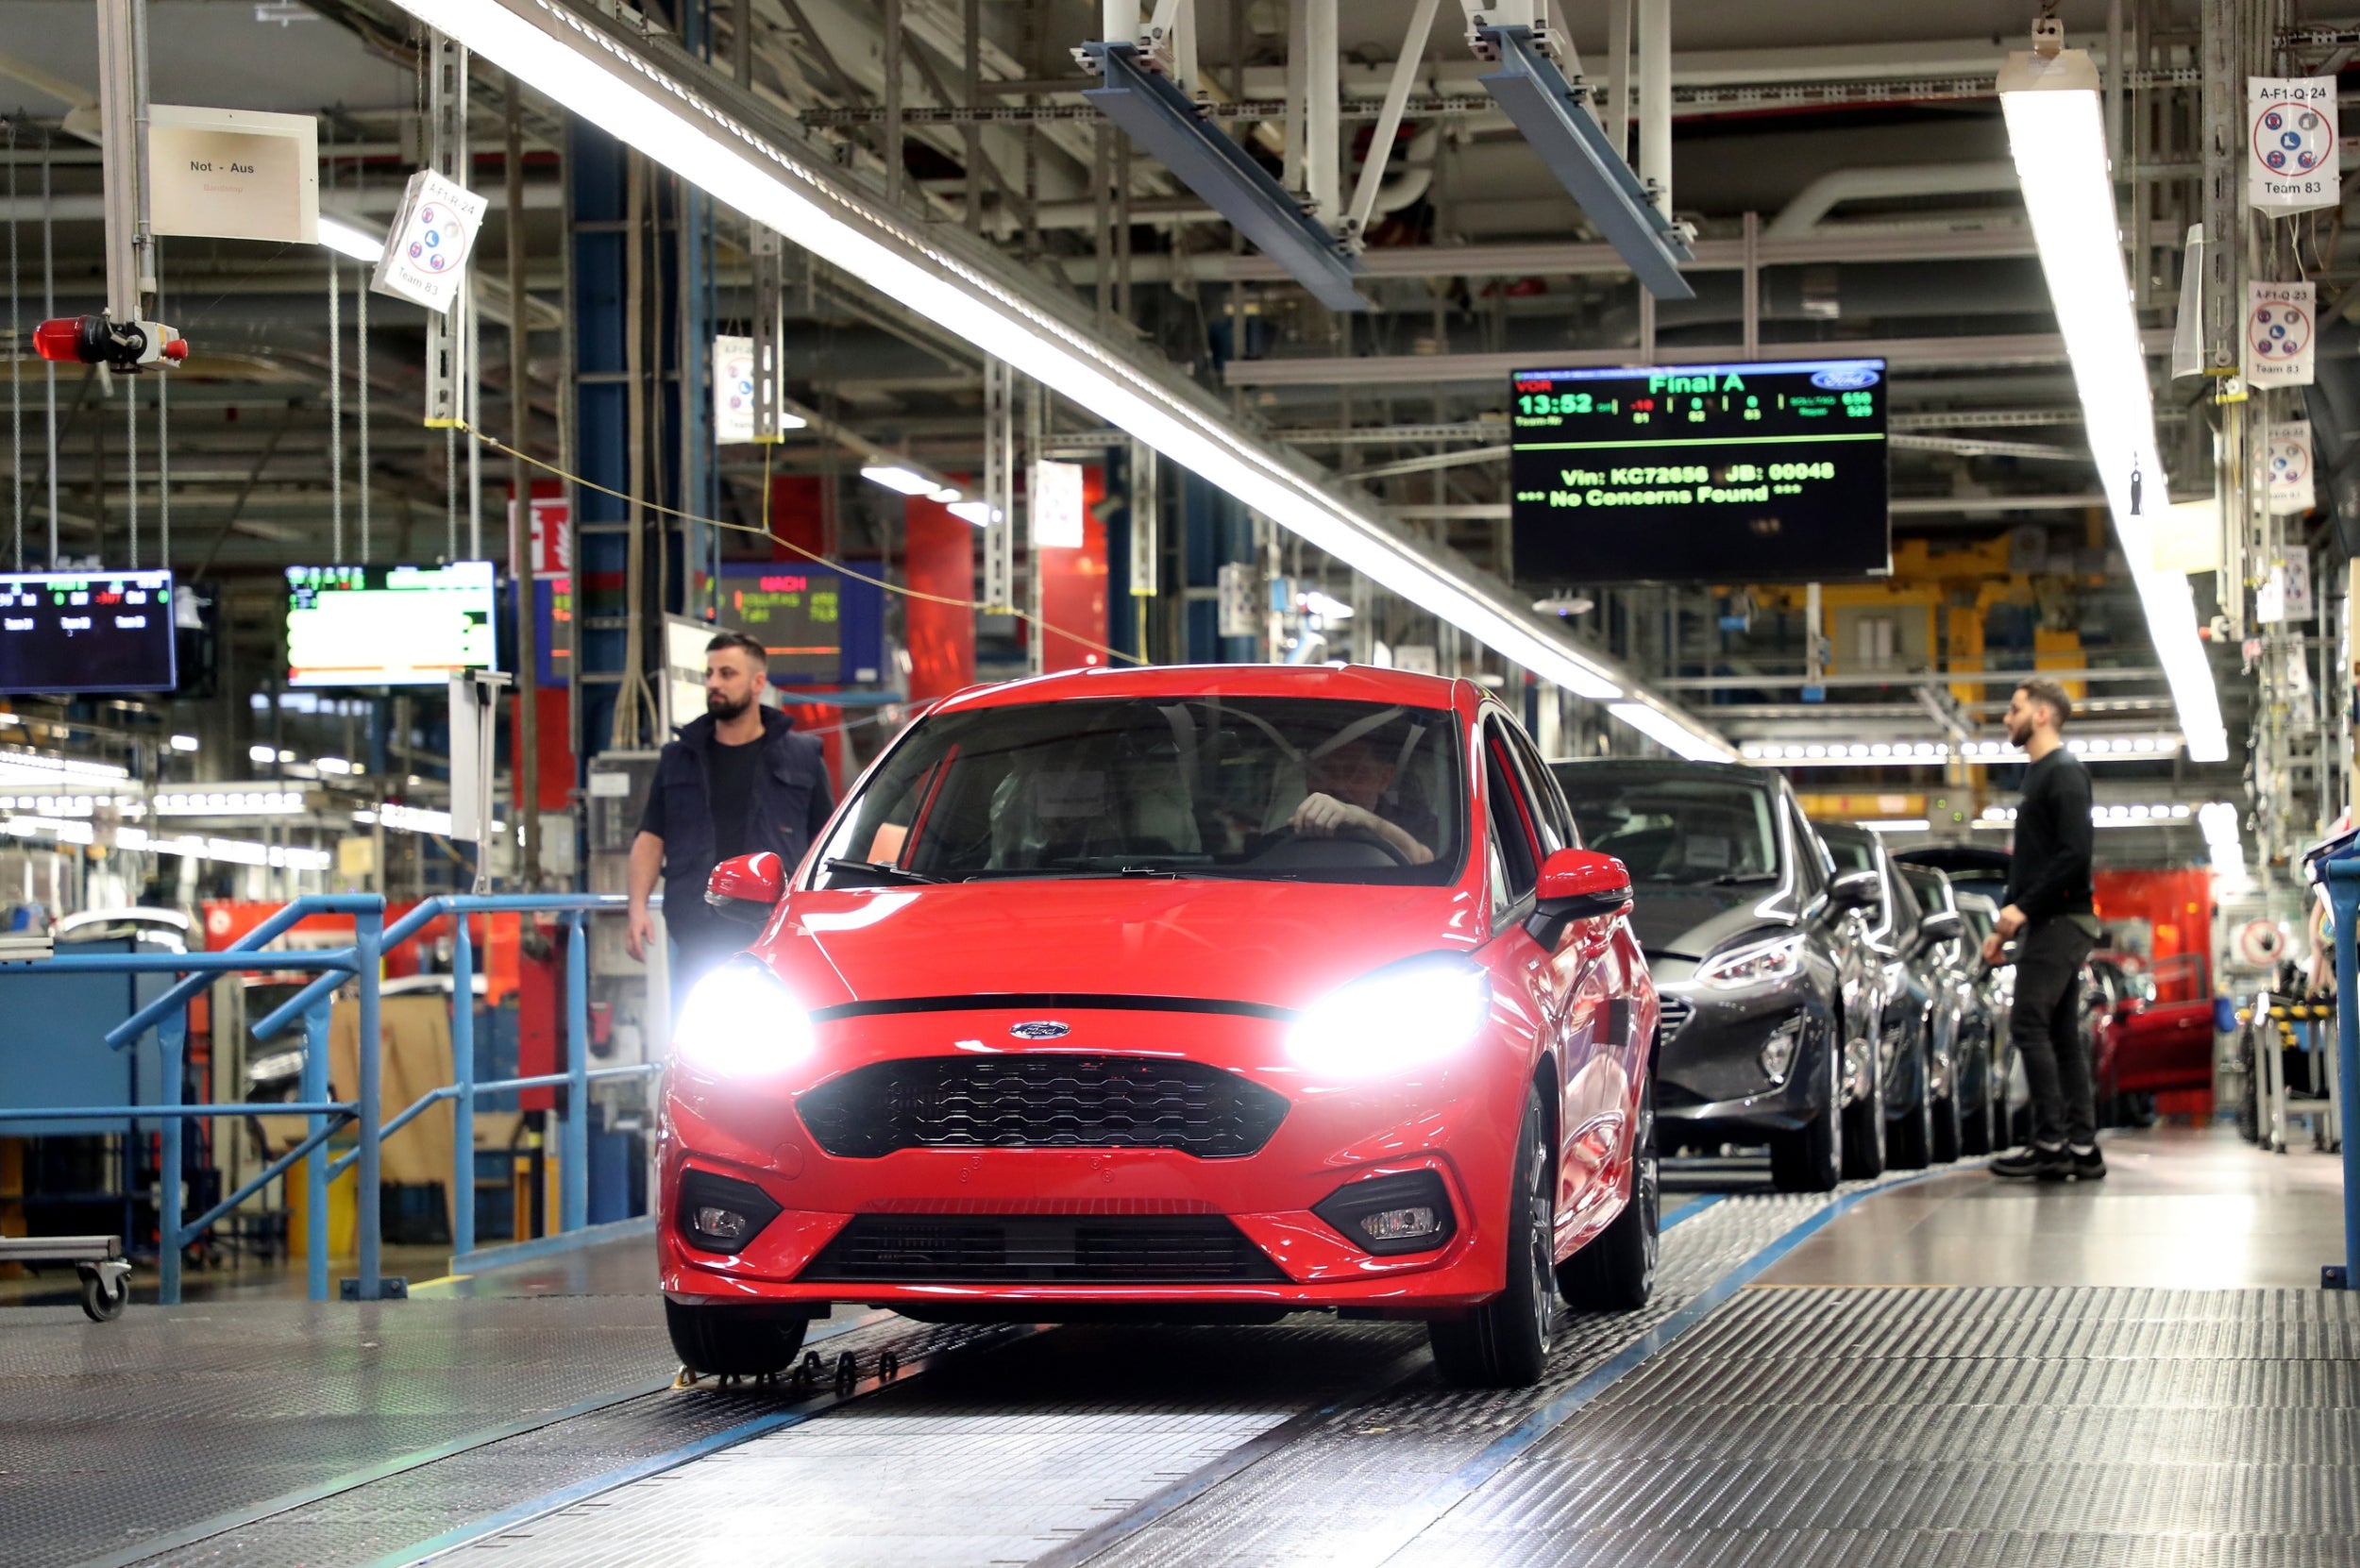 Ford has said it will act to protect its business in the event of a no deal Brexit